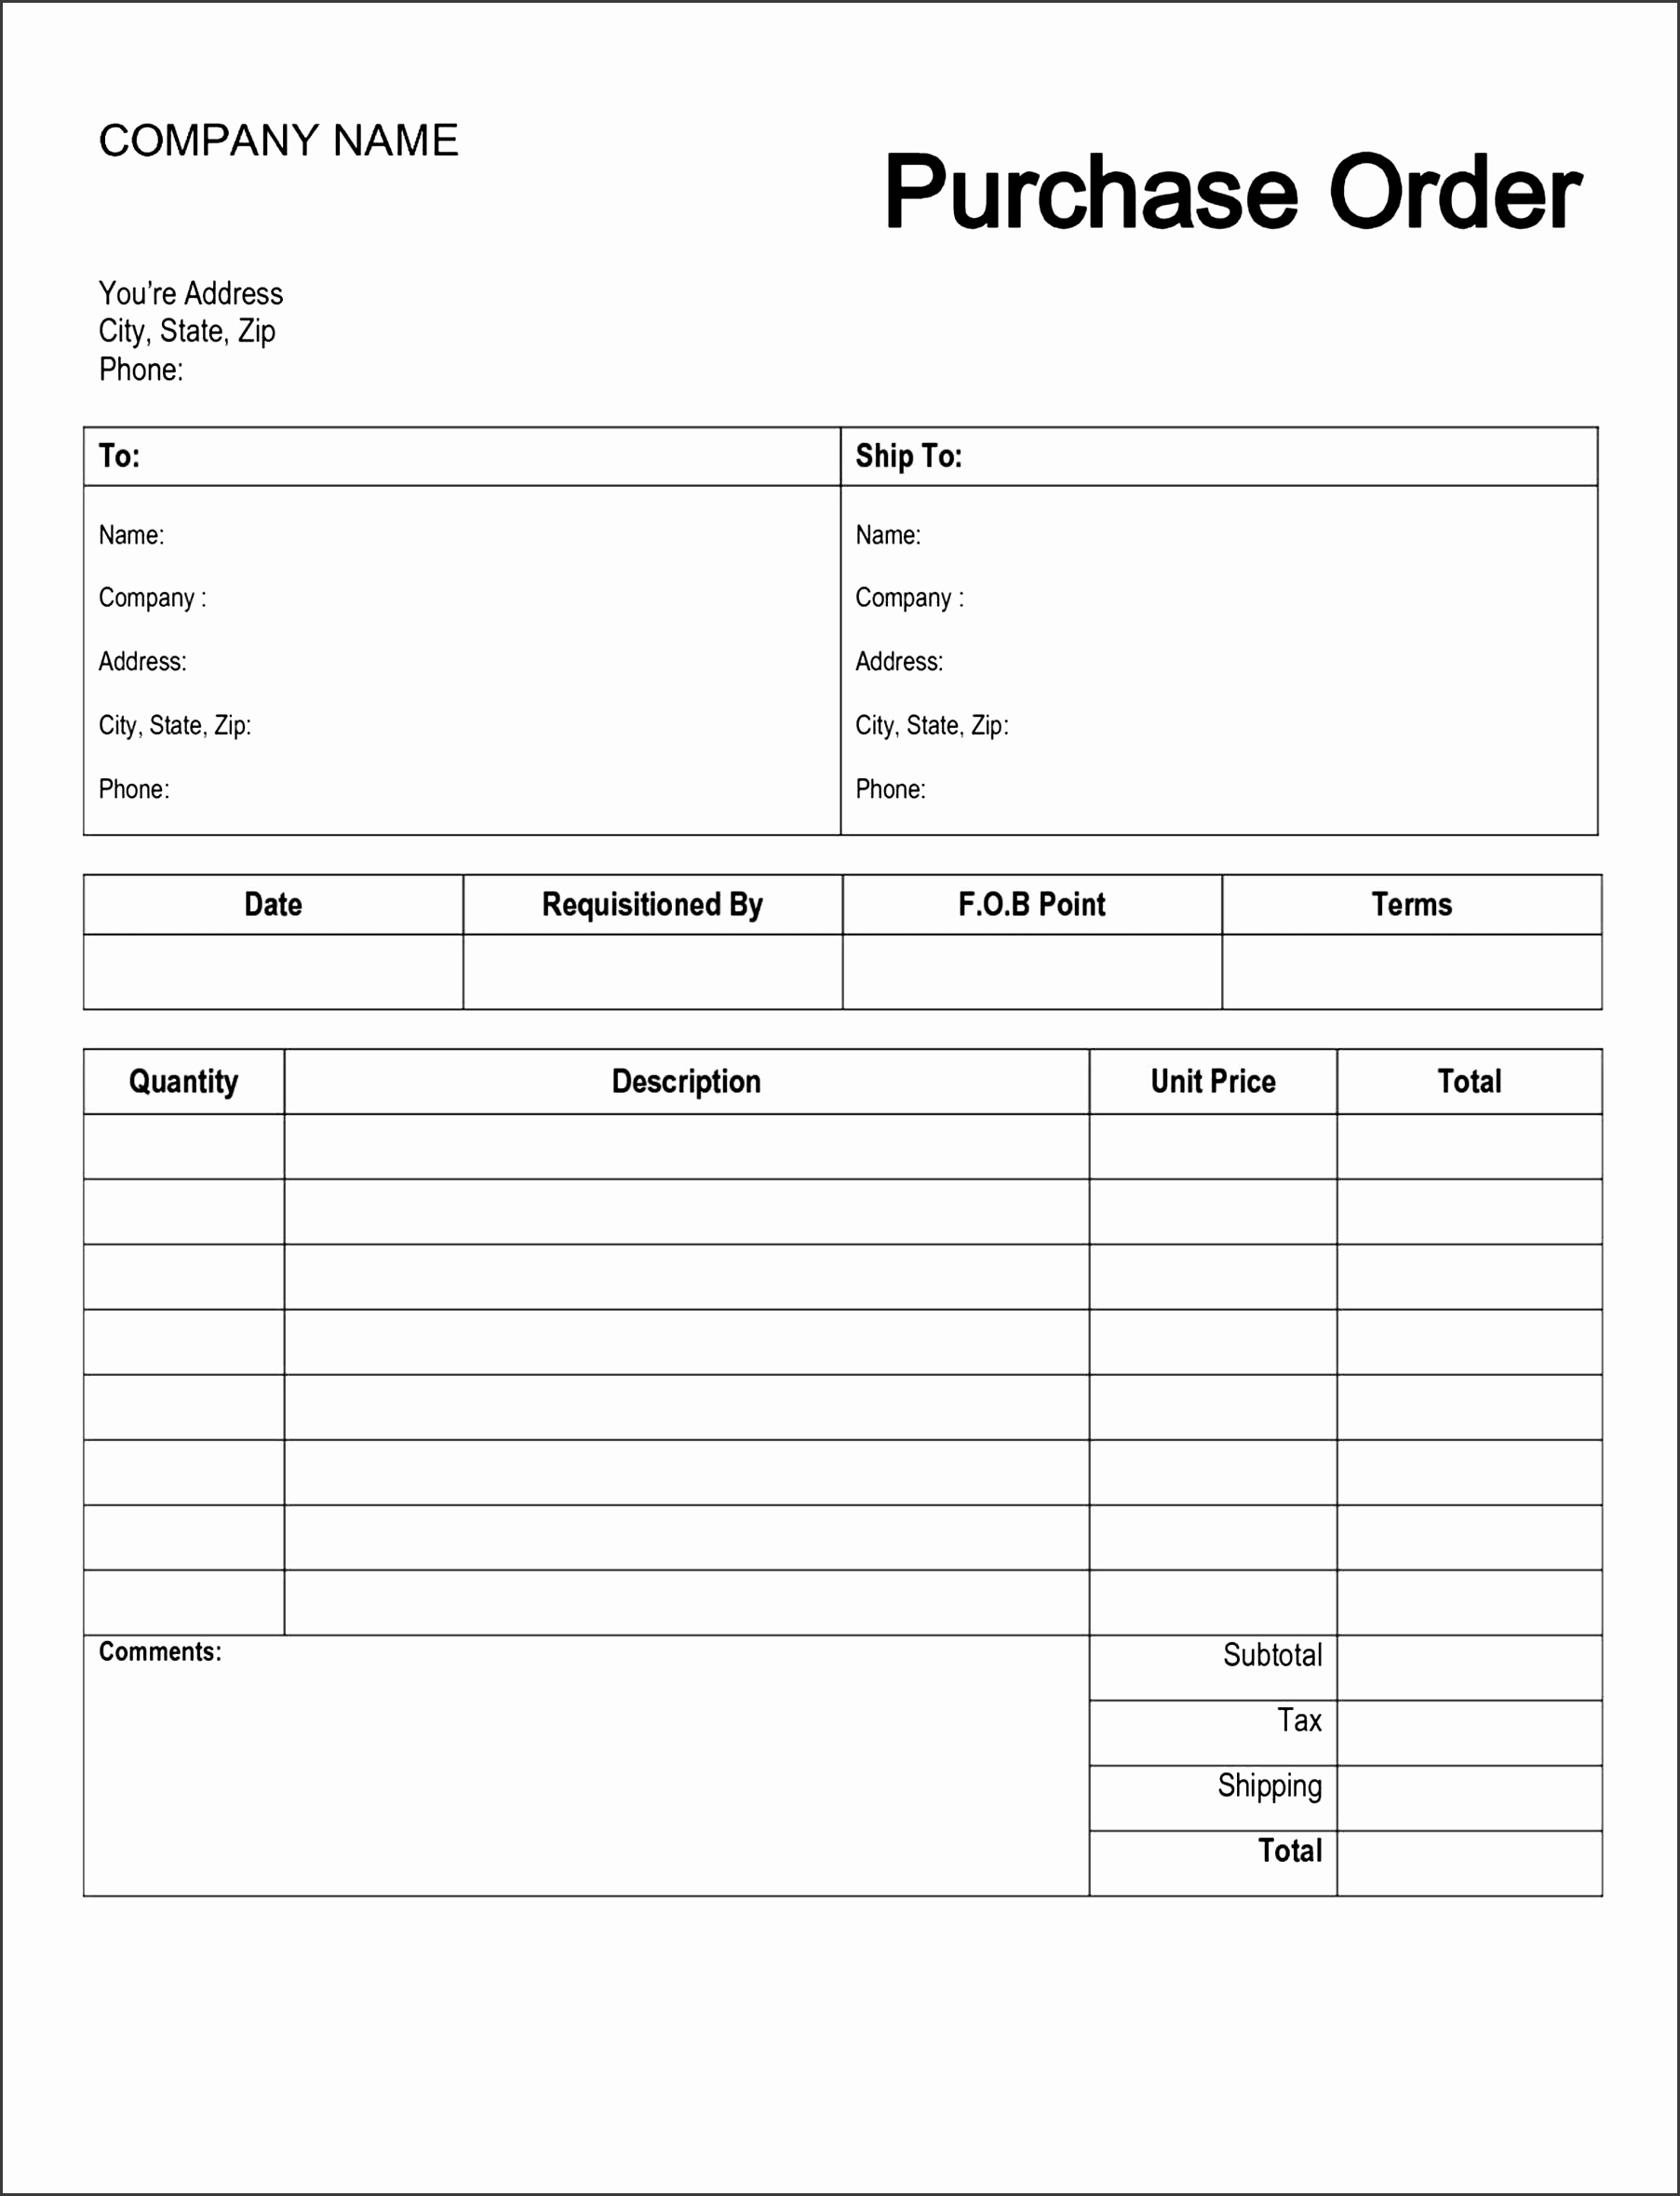 excel purchase order template job resumes word teknoswitch excel purchase order template excel purchase order template